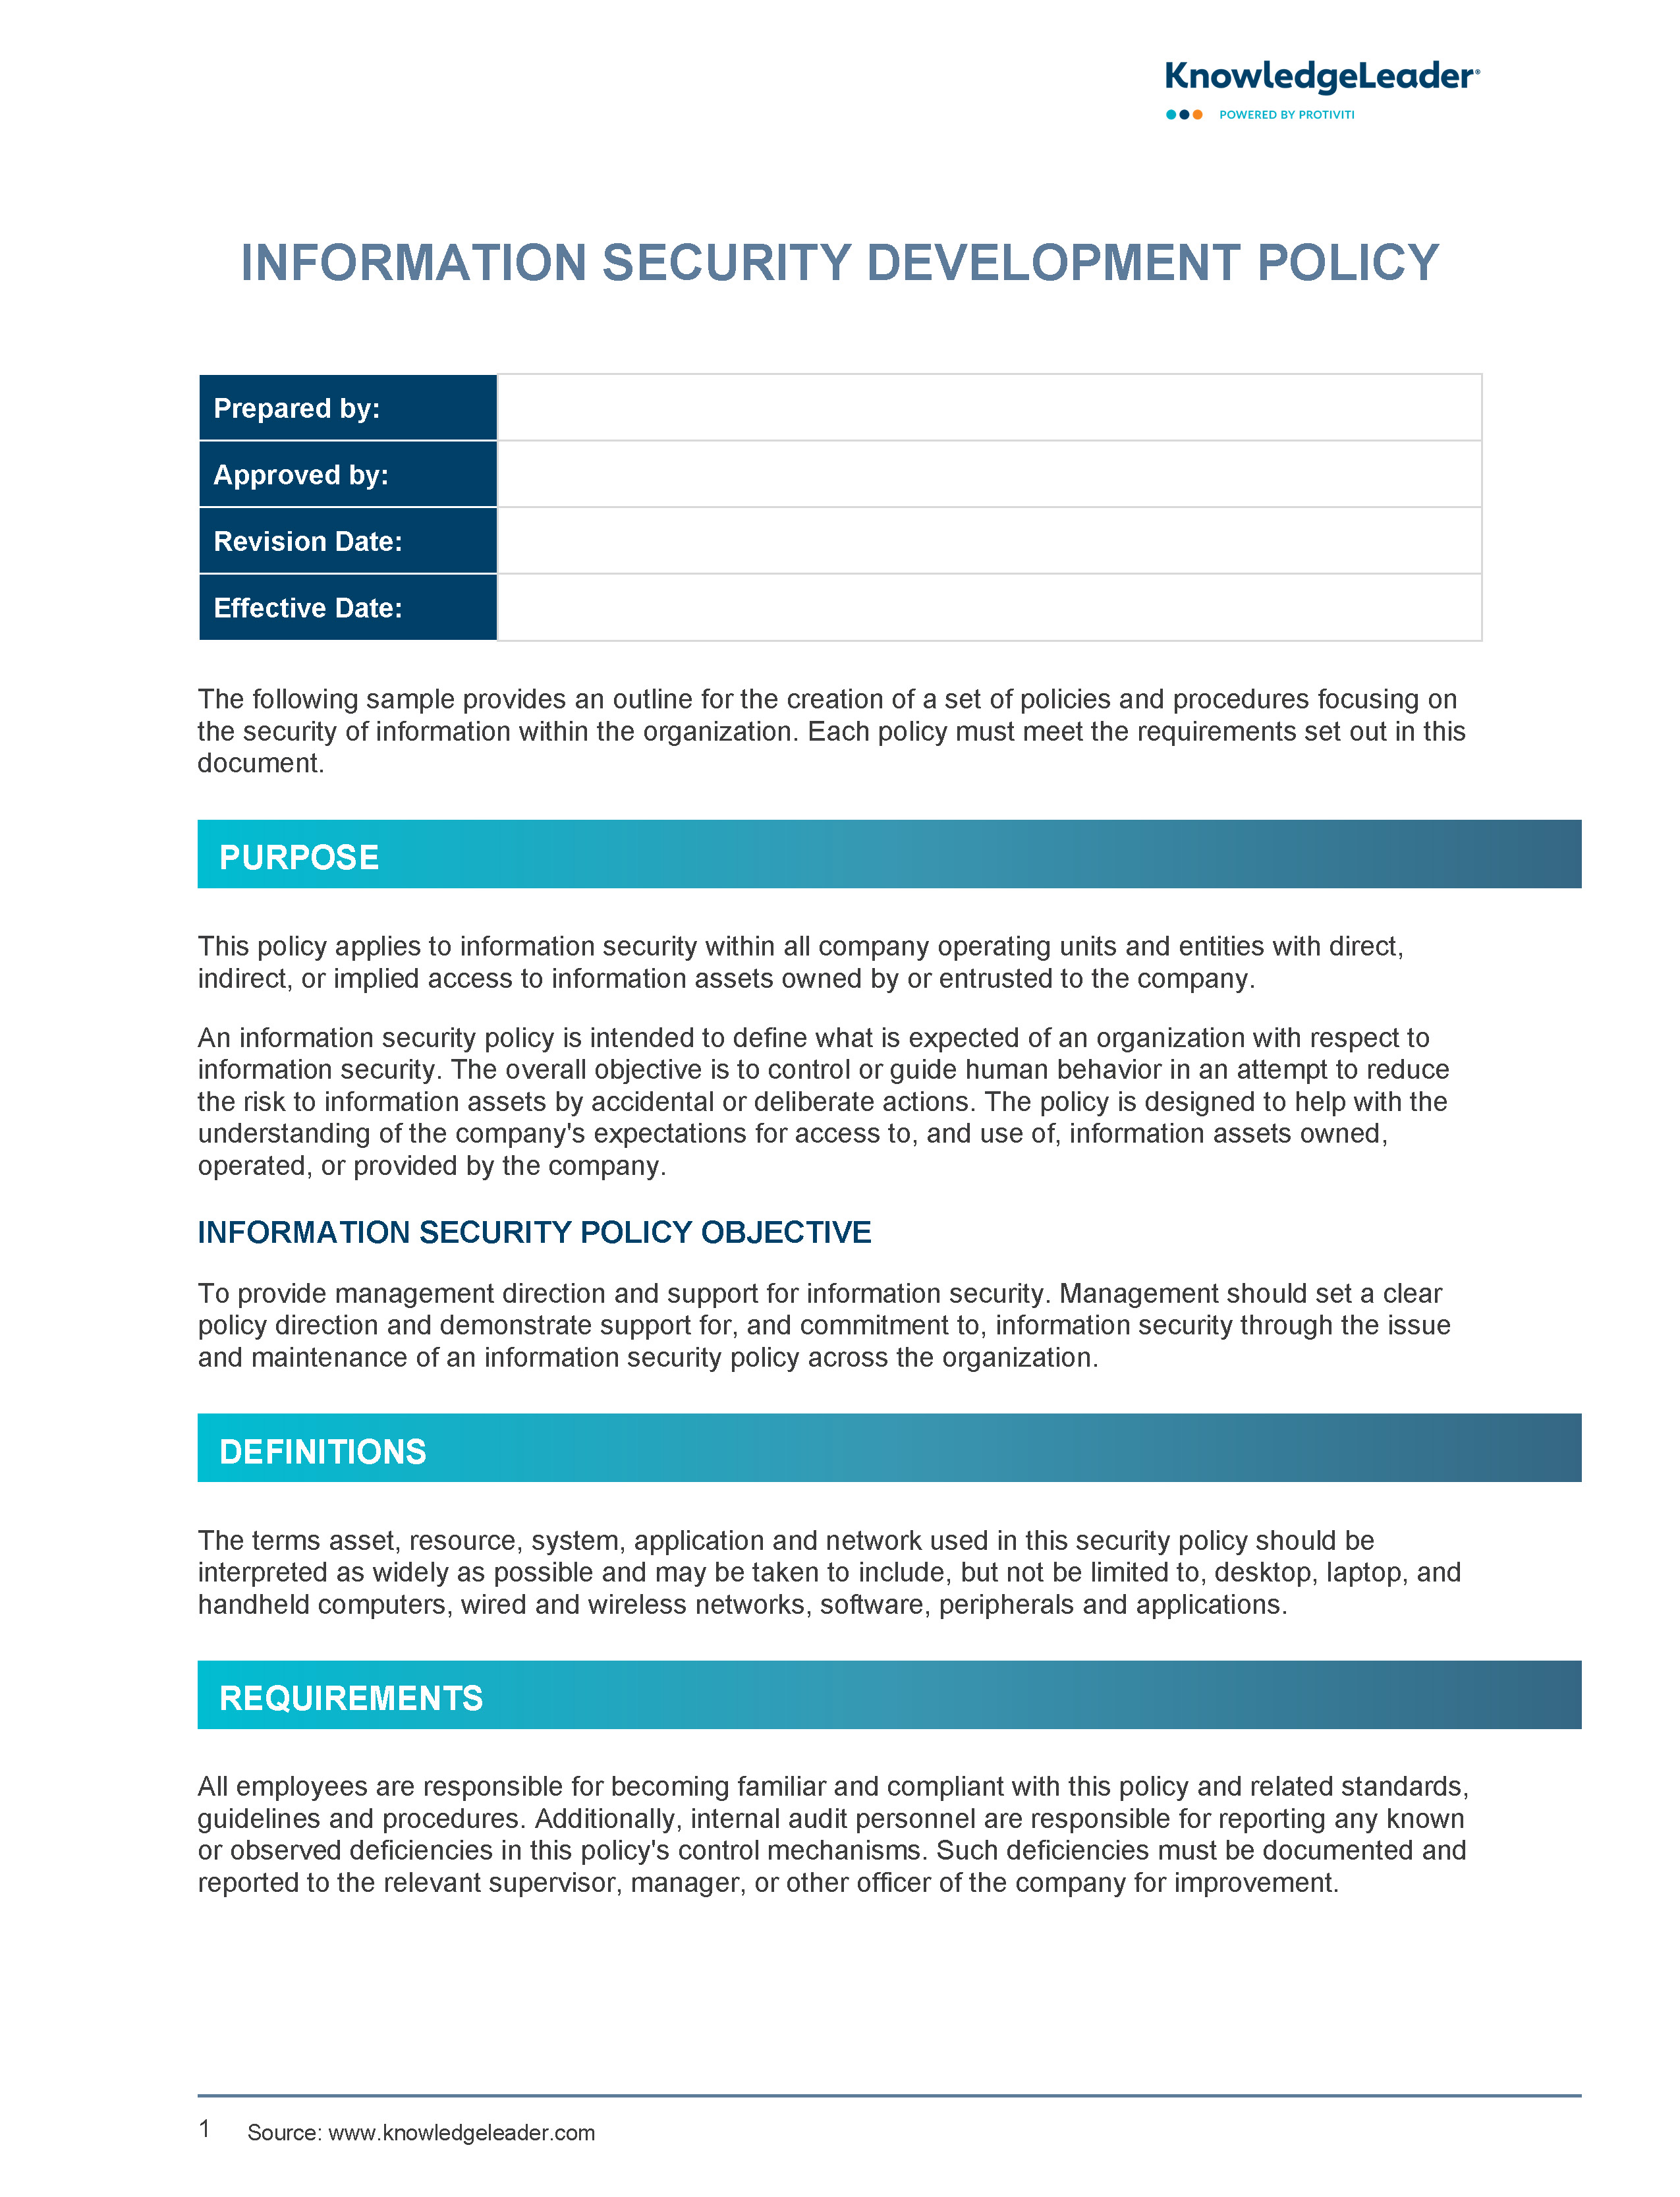 Screenshot of the first page of Information Security Development Policy